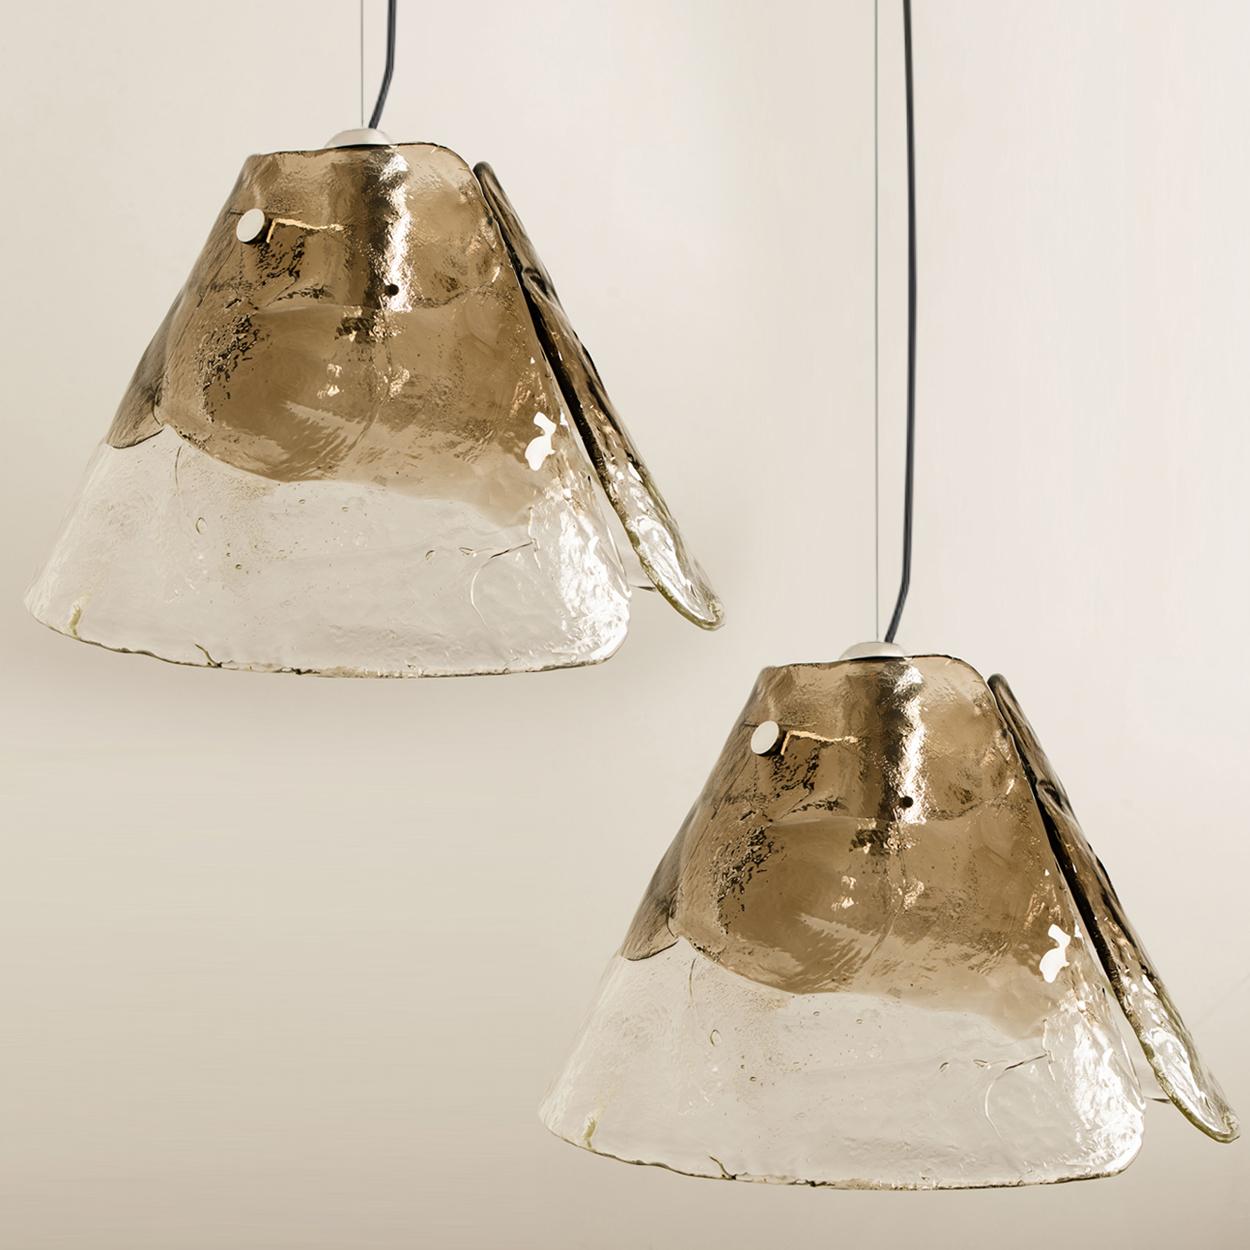 Mid-Century Modern 1 of the 2 Pendant Lamps by Carlo Nason for Mazzega